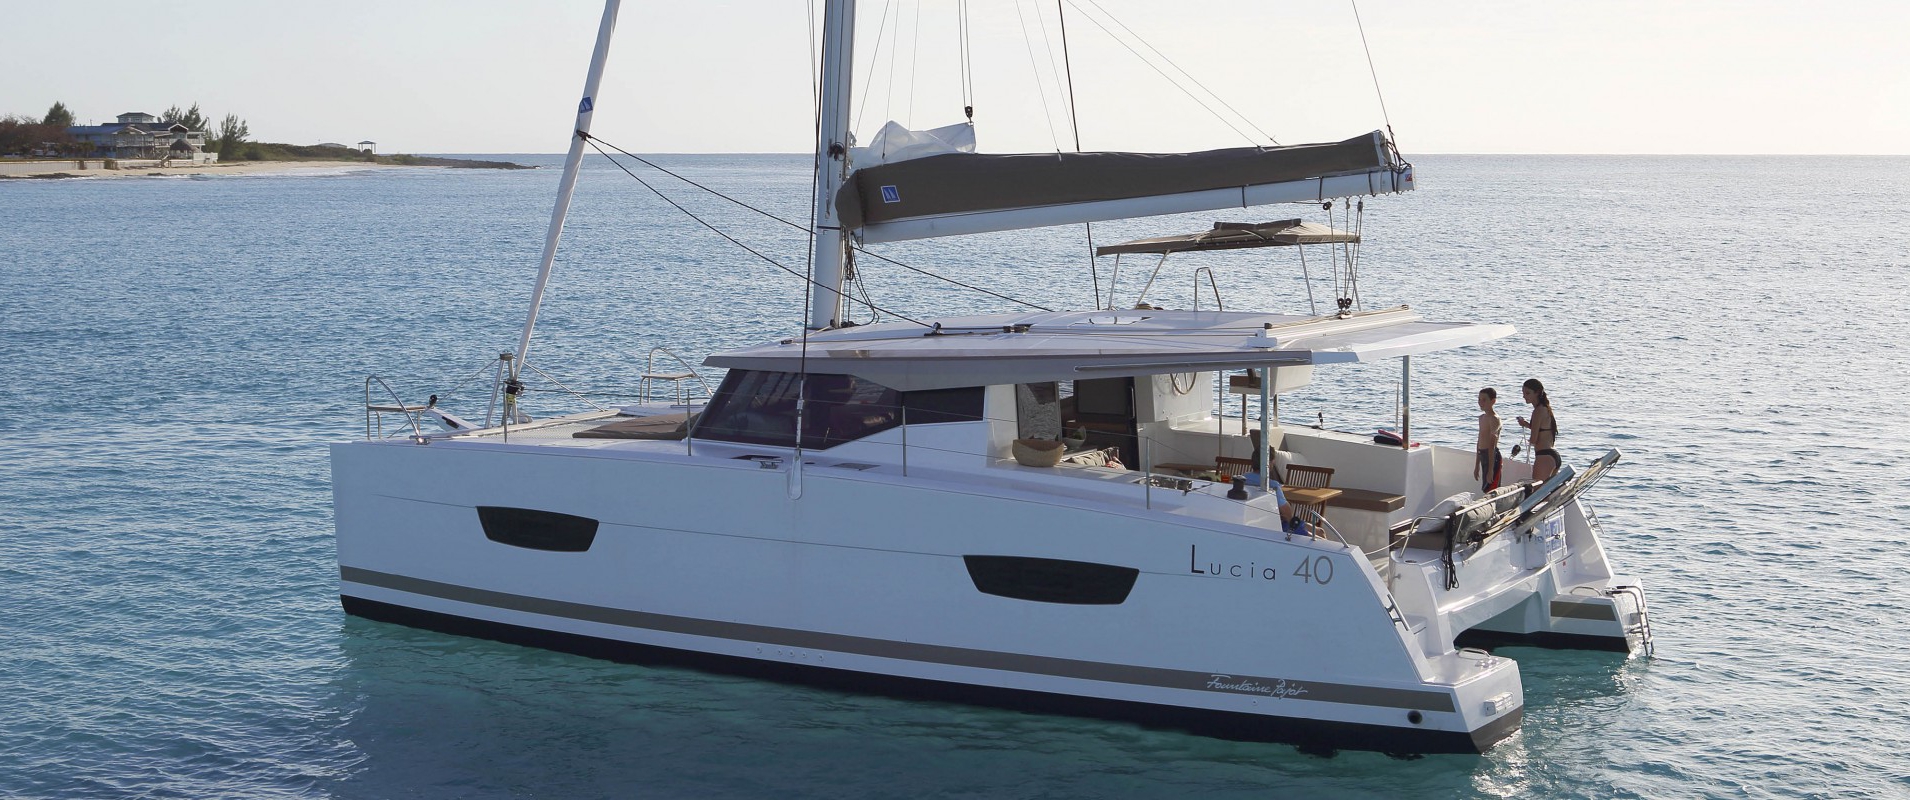 Waypoints Yacht Charters Fountaine Pajot Lucia 40 Winged Arrow Catamaran in St. Thomas